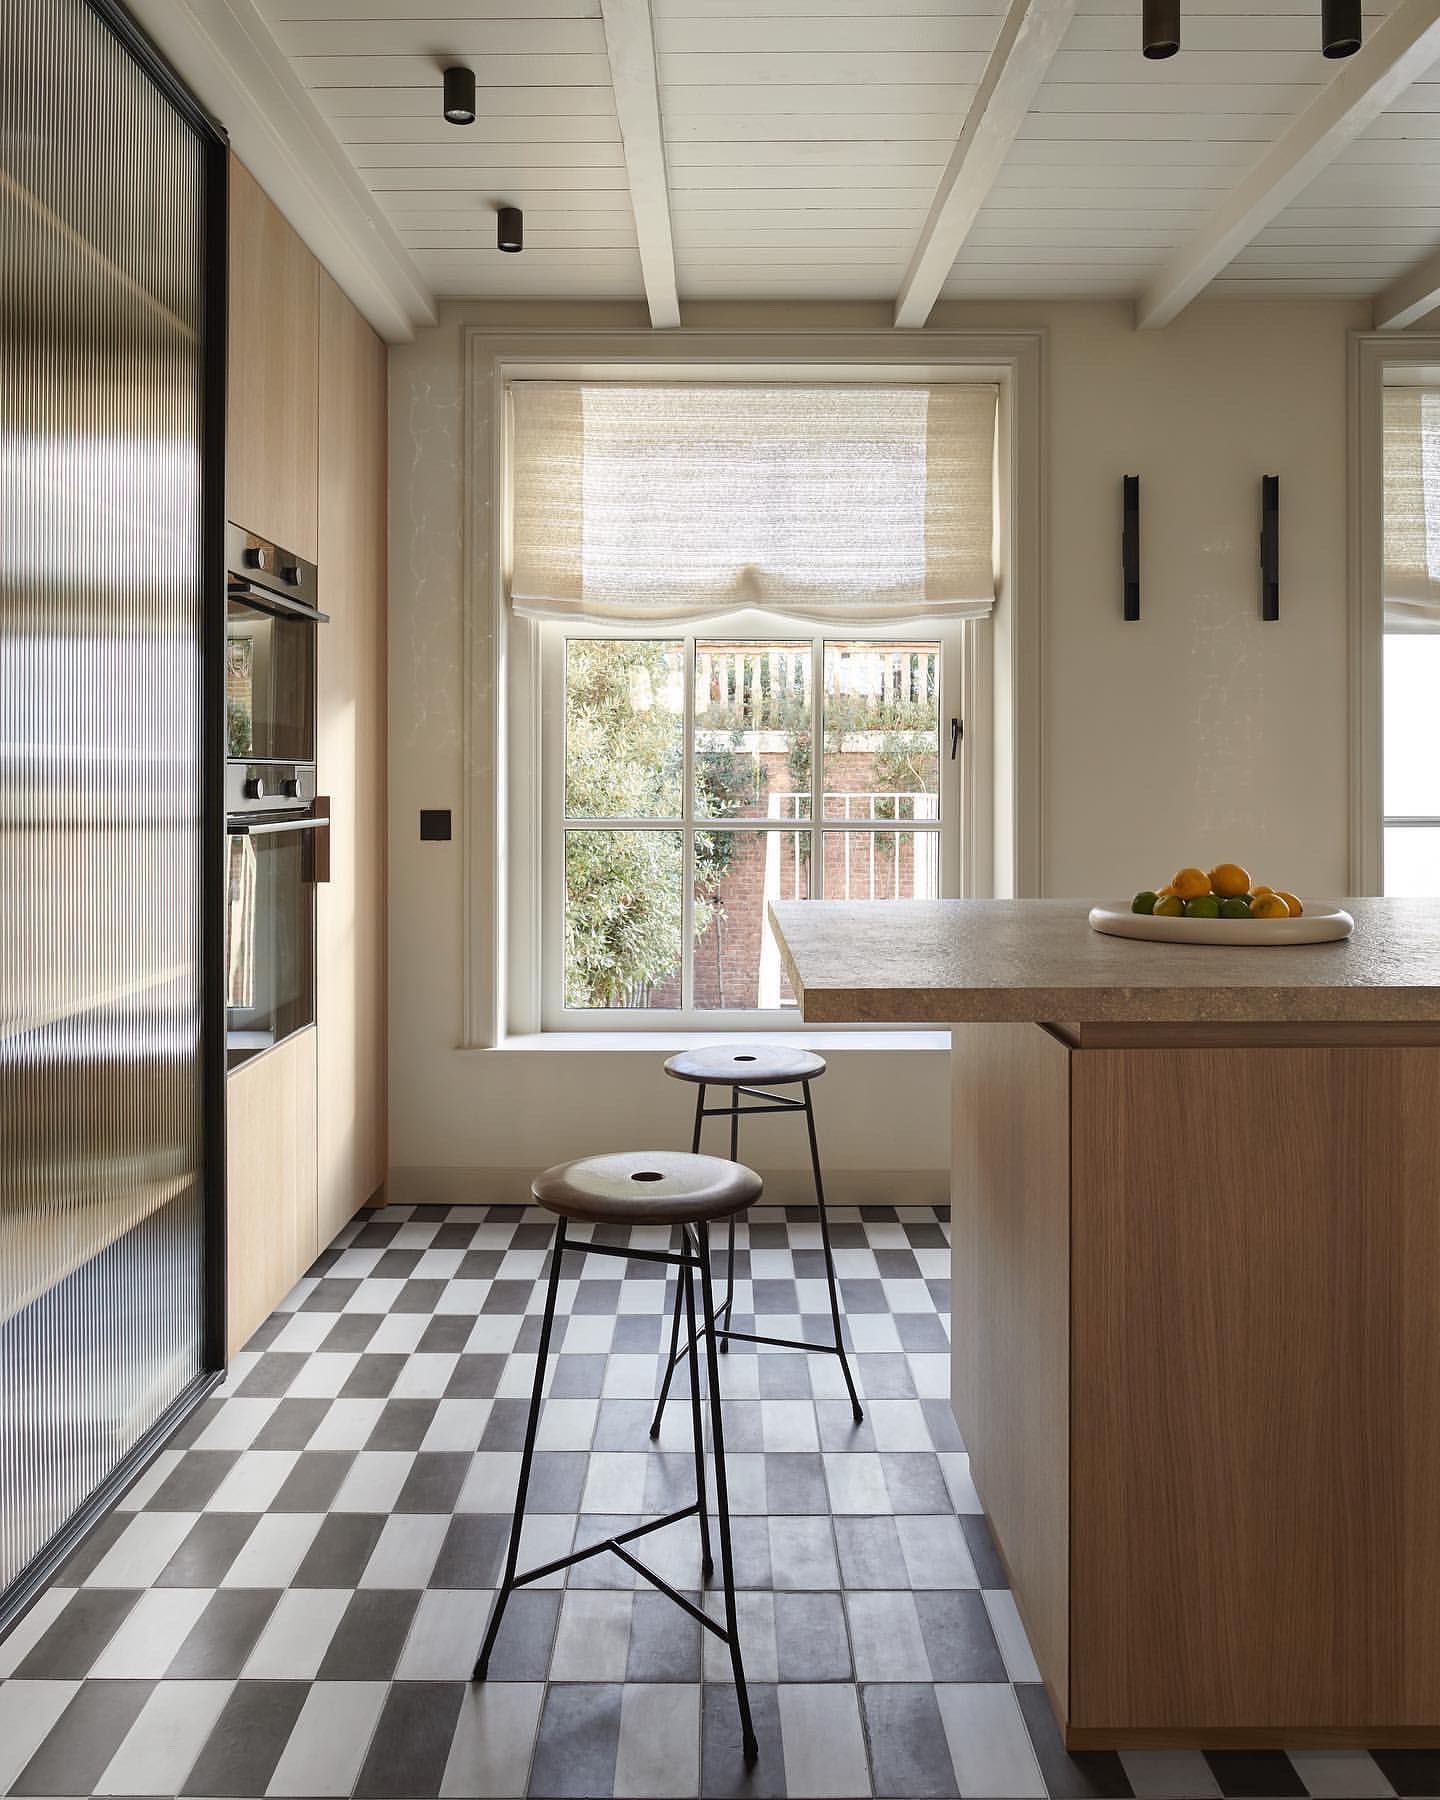 Modern Kitchen Design, Checker tiles , fluted glass cabinets and beams on ceiling, spot lights